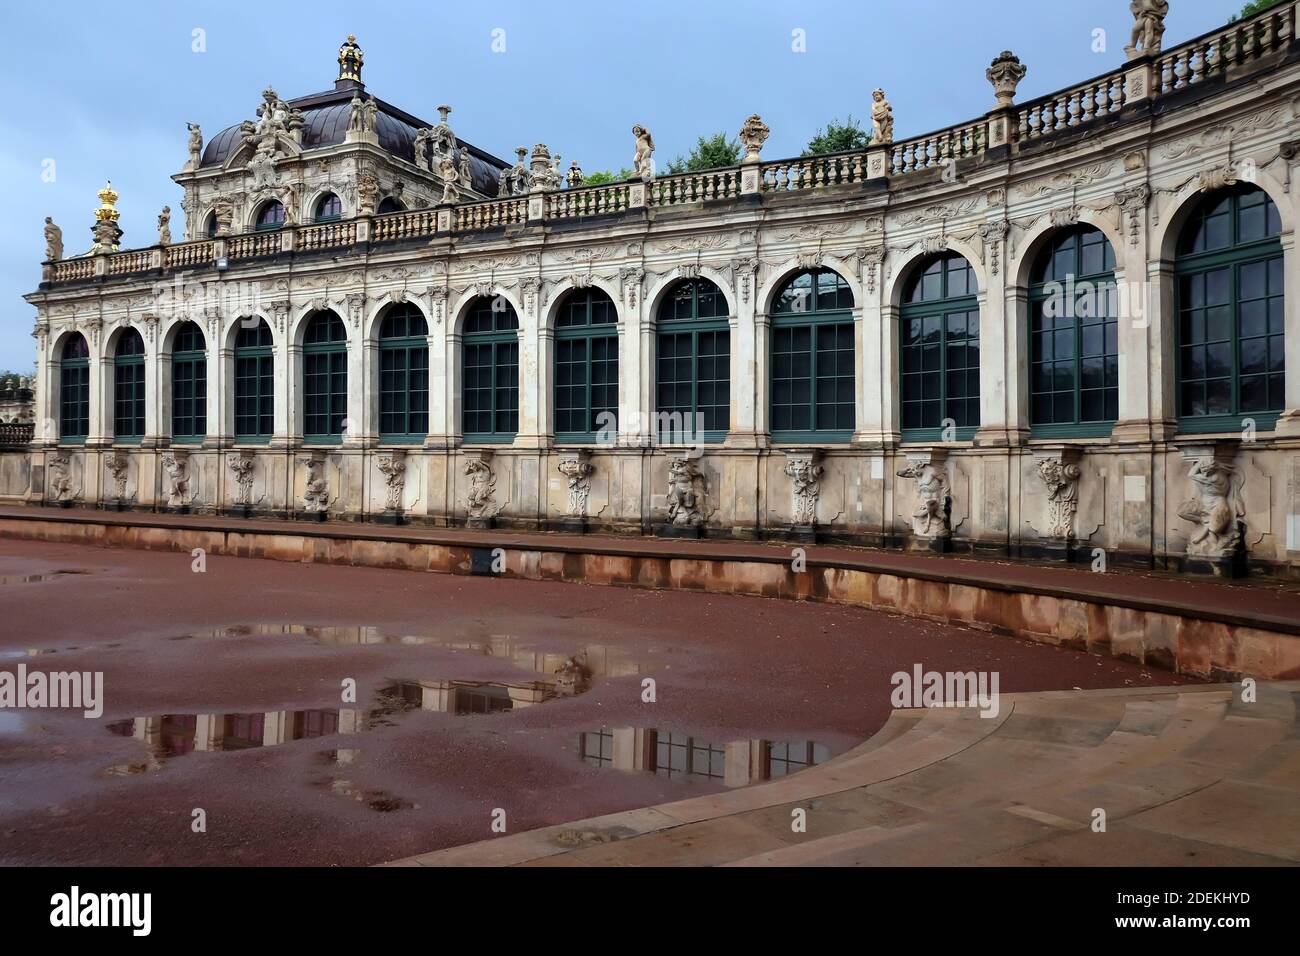 Famous Zwinger palace (Der Dresdner Zwinger) Art Gallery of Dresden, Saxony, Germany Stock Photo